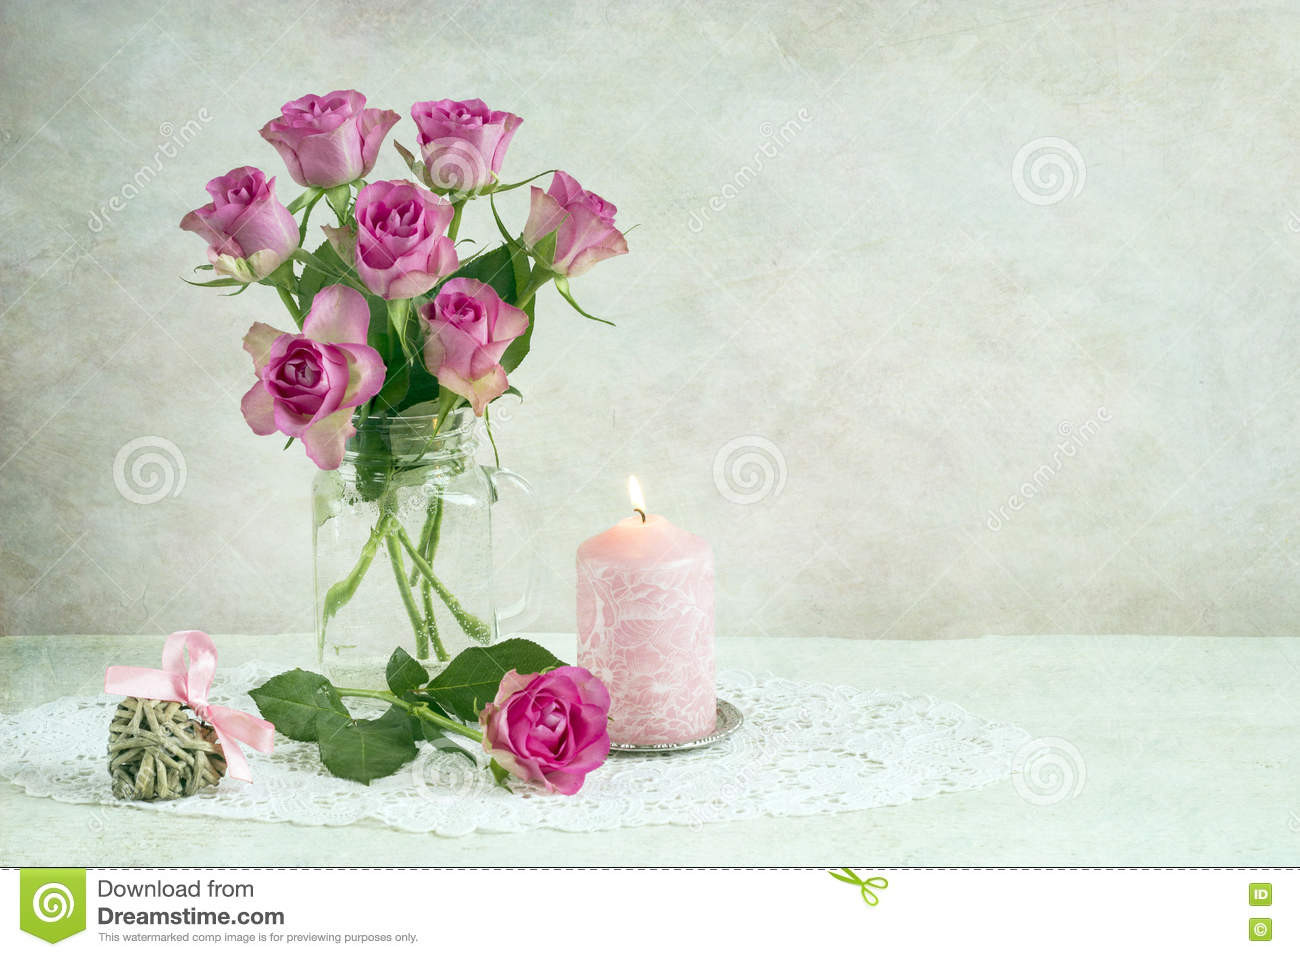 16 attractive Still Life Vase Of Flowers 2024 free download still life vase of flowers of pink roses stock image image of fresh green flora 70495805 throughout pink roses